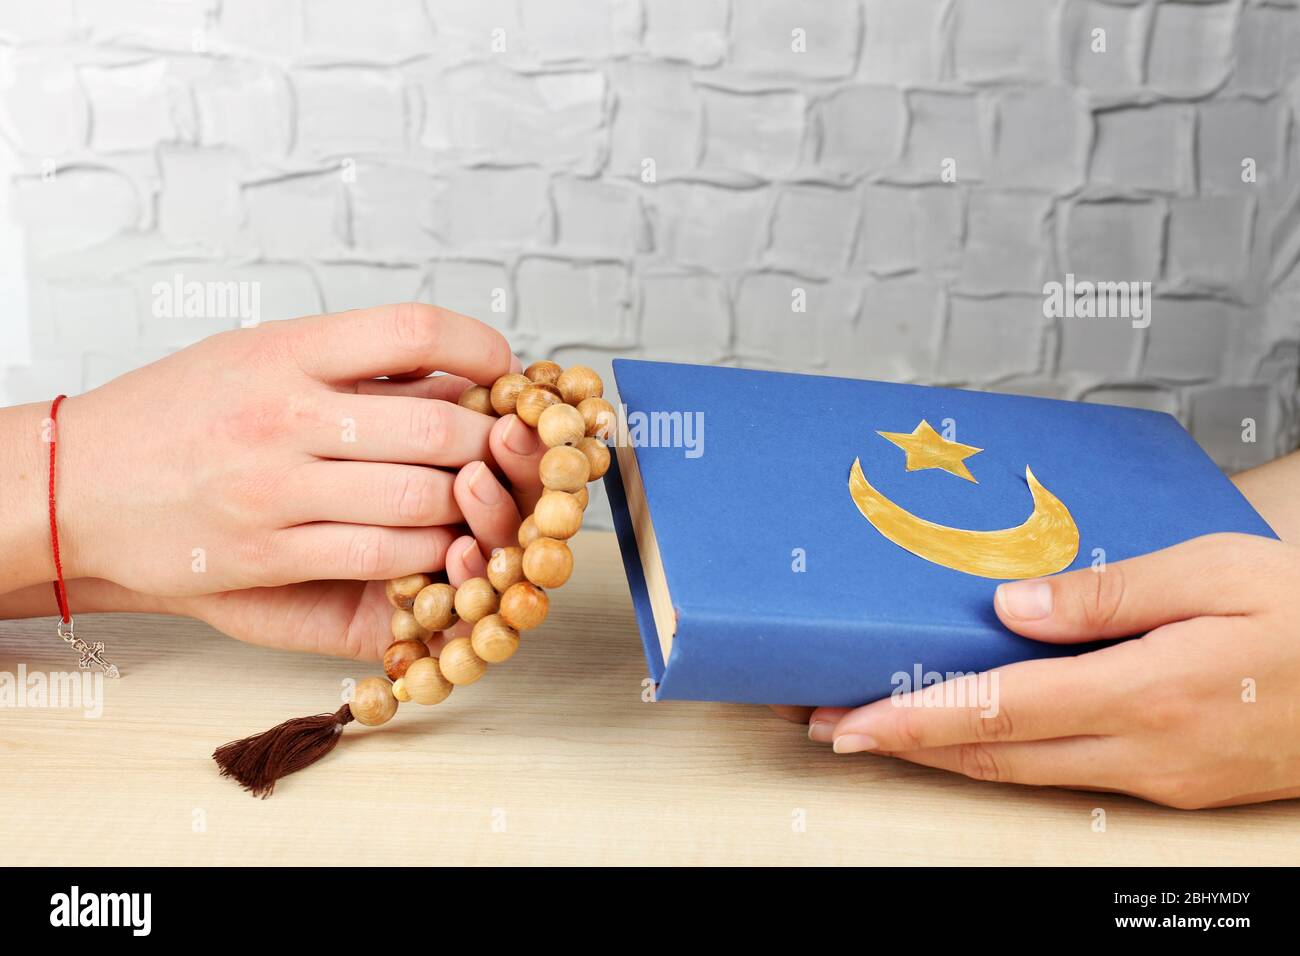 Hands of two friends with different religions symbols Stock Photo